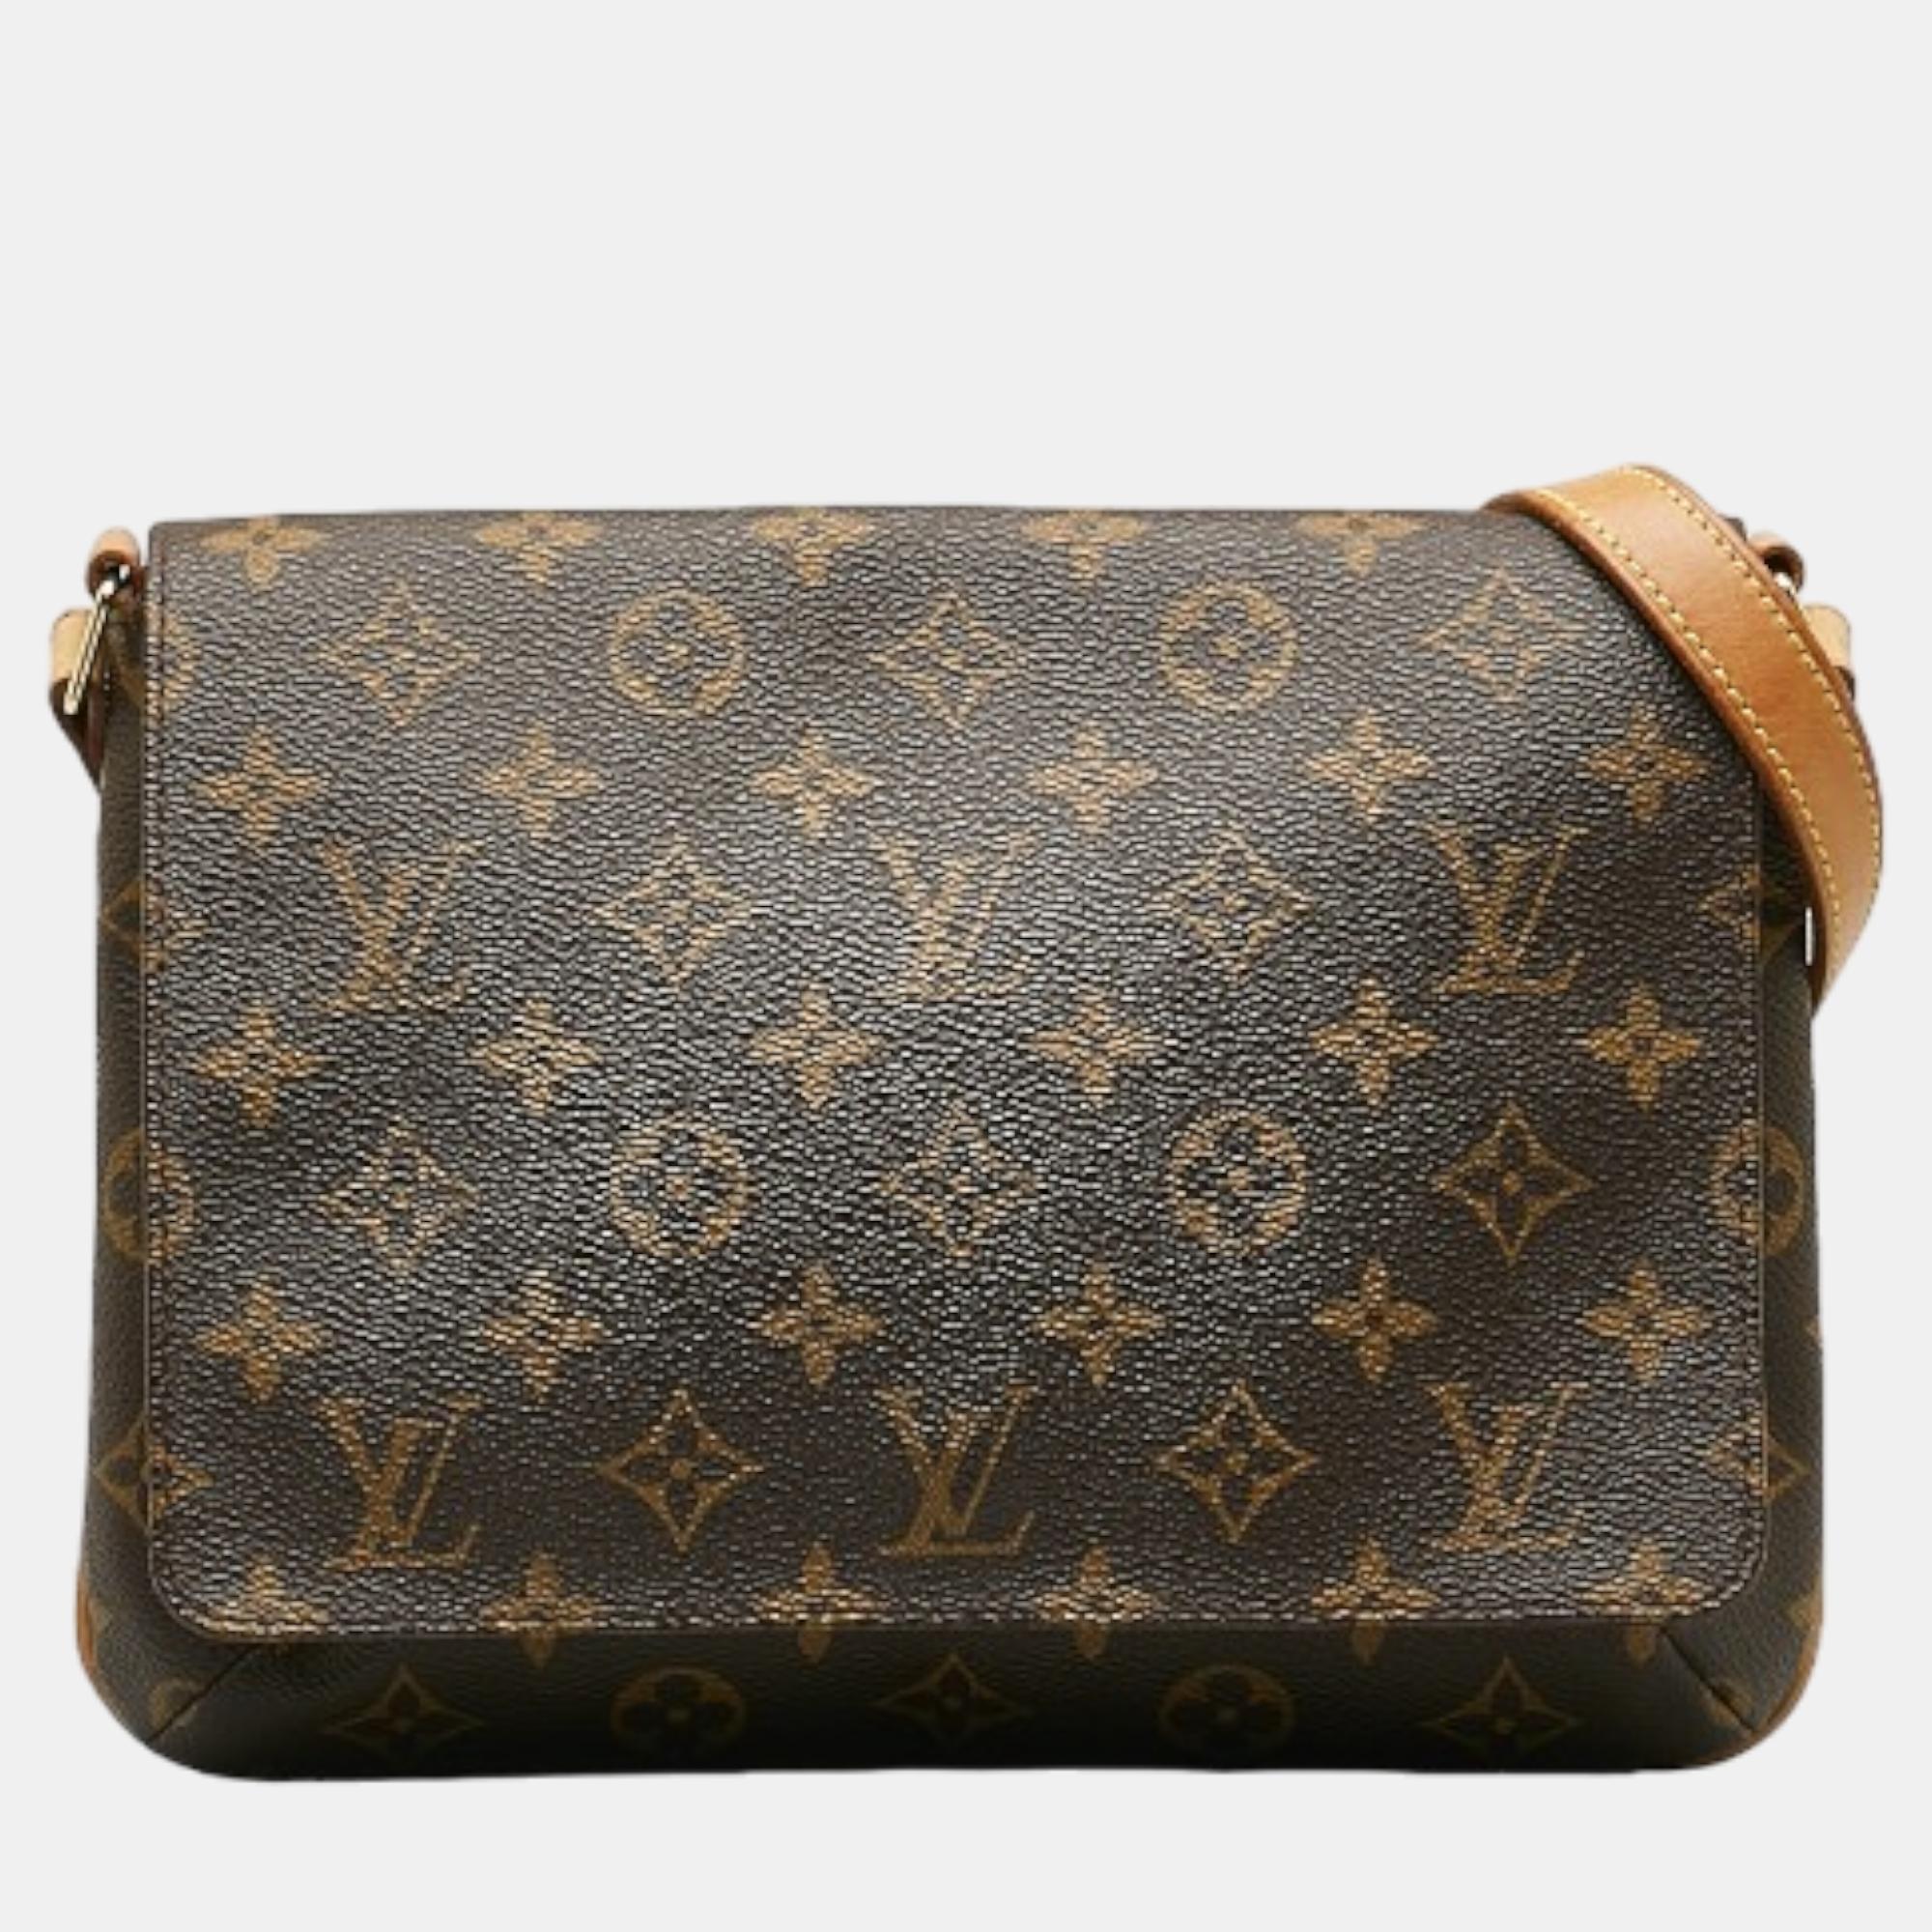 Crafted with precision this Louis Vuitton shoulder bag combines luxurious materials with impeccable design ensuring you make a sophisticated statement wherever you go. Invest in it today.